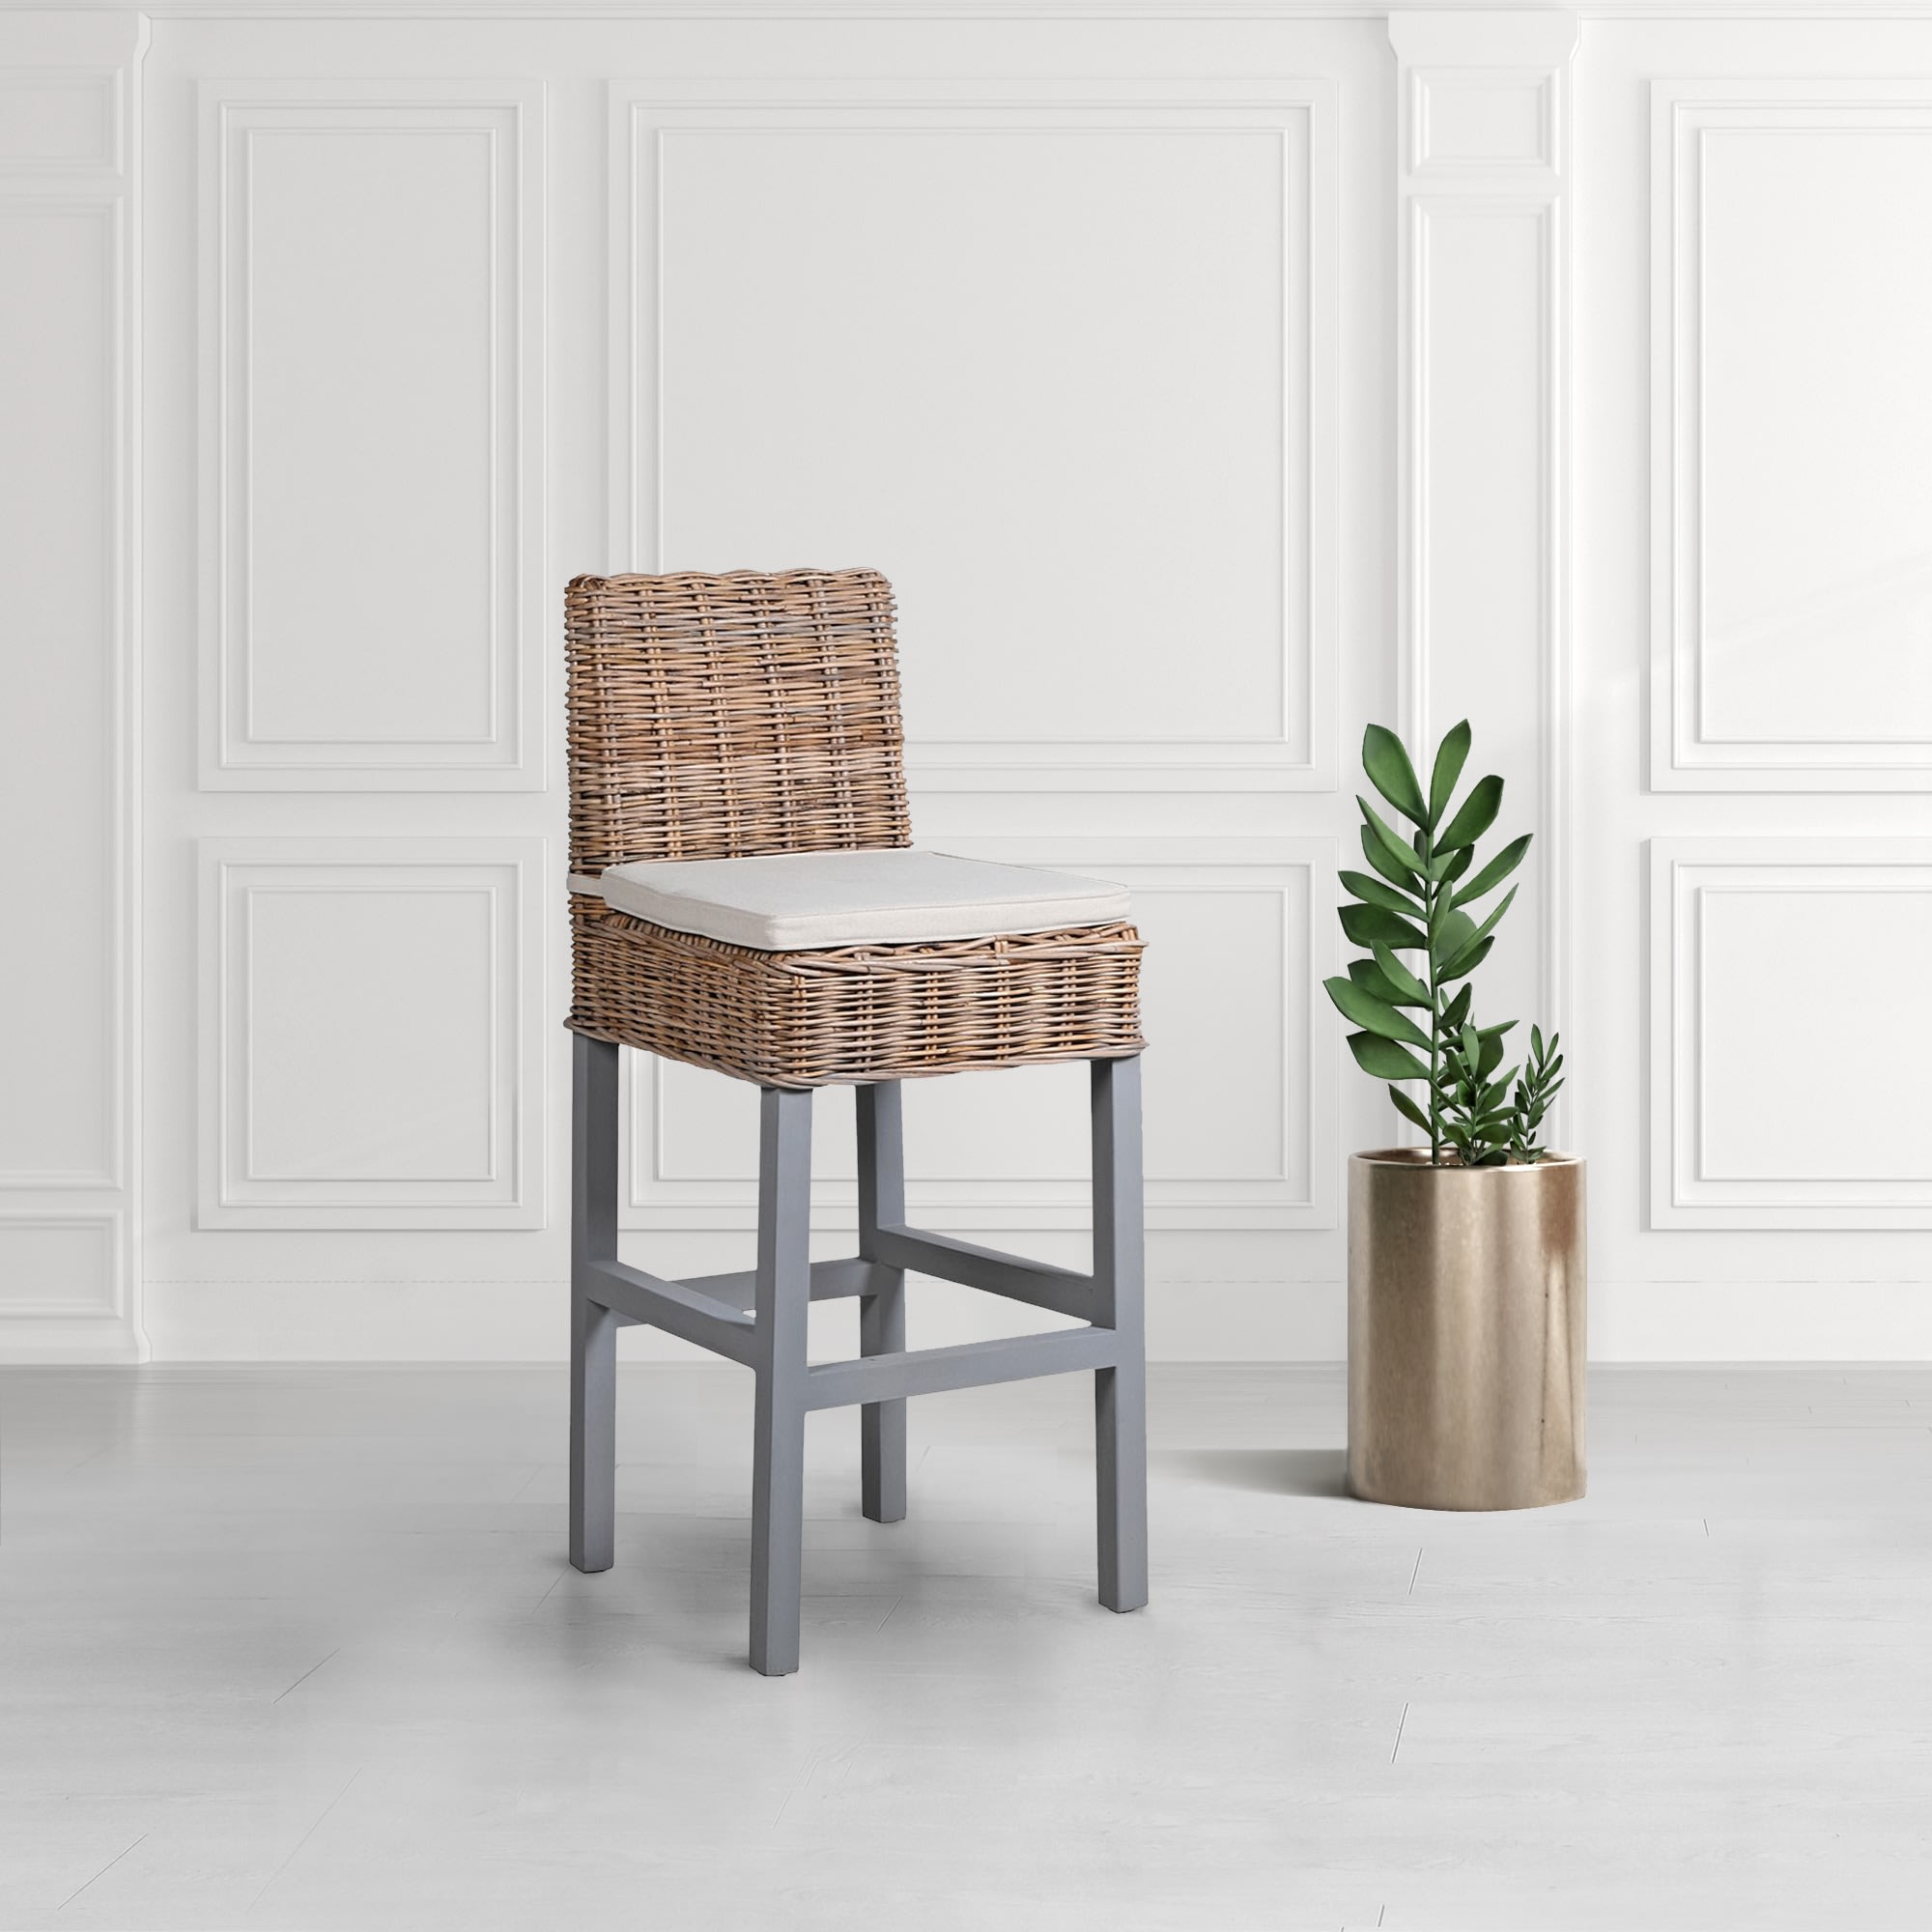 Natural Weave Bar Stool with Cushion